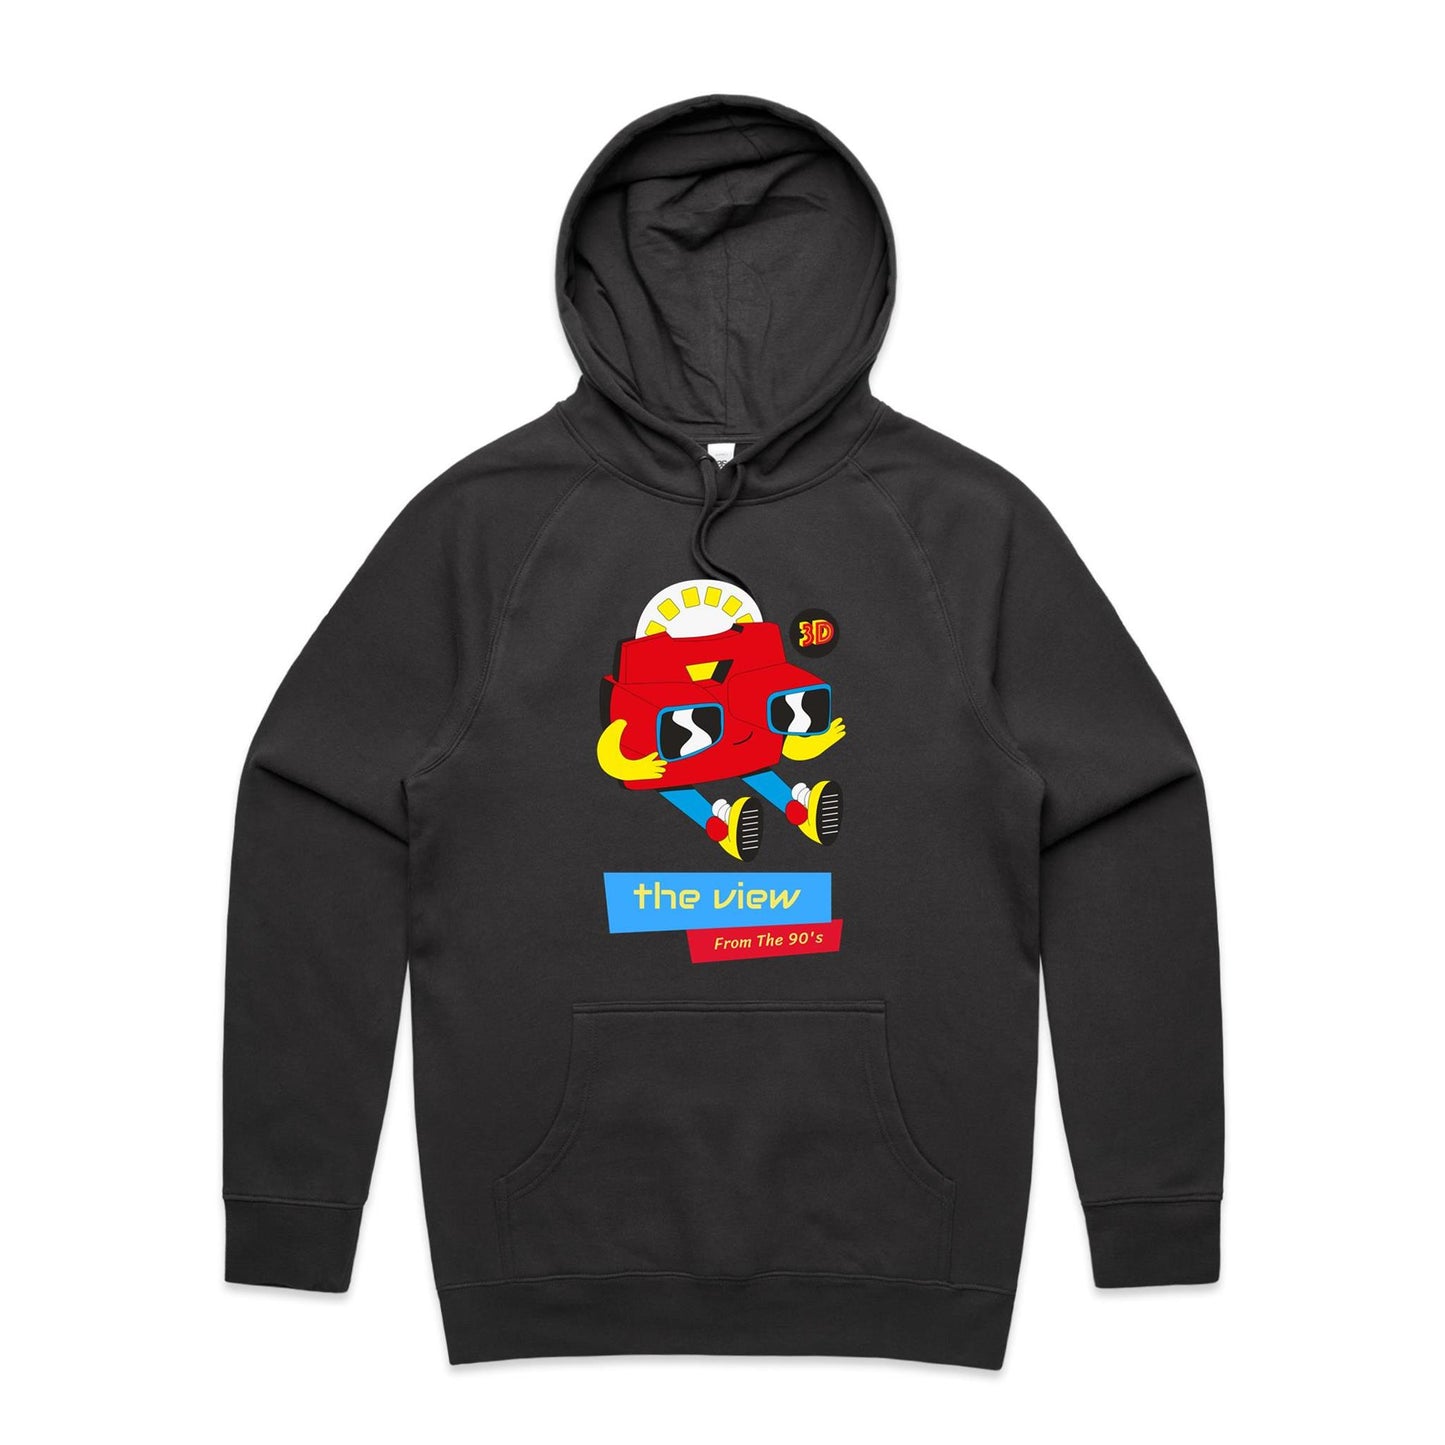 The View From The 90's - Supply Hood Coal Mens Supply Hoodie Retro